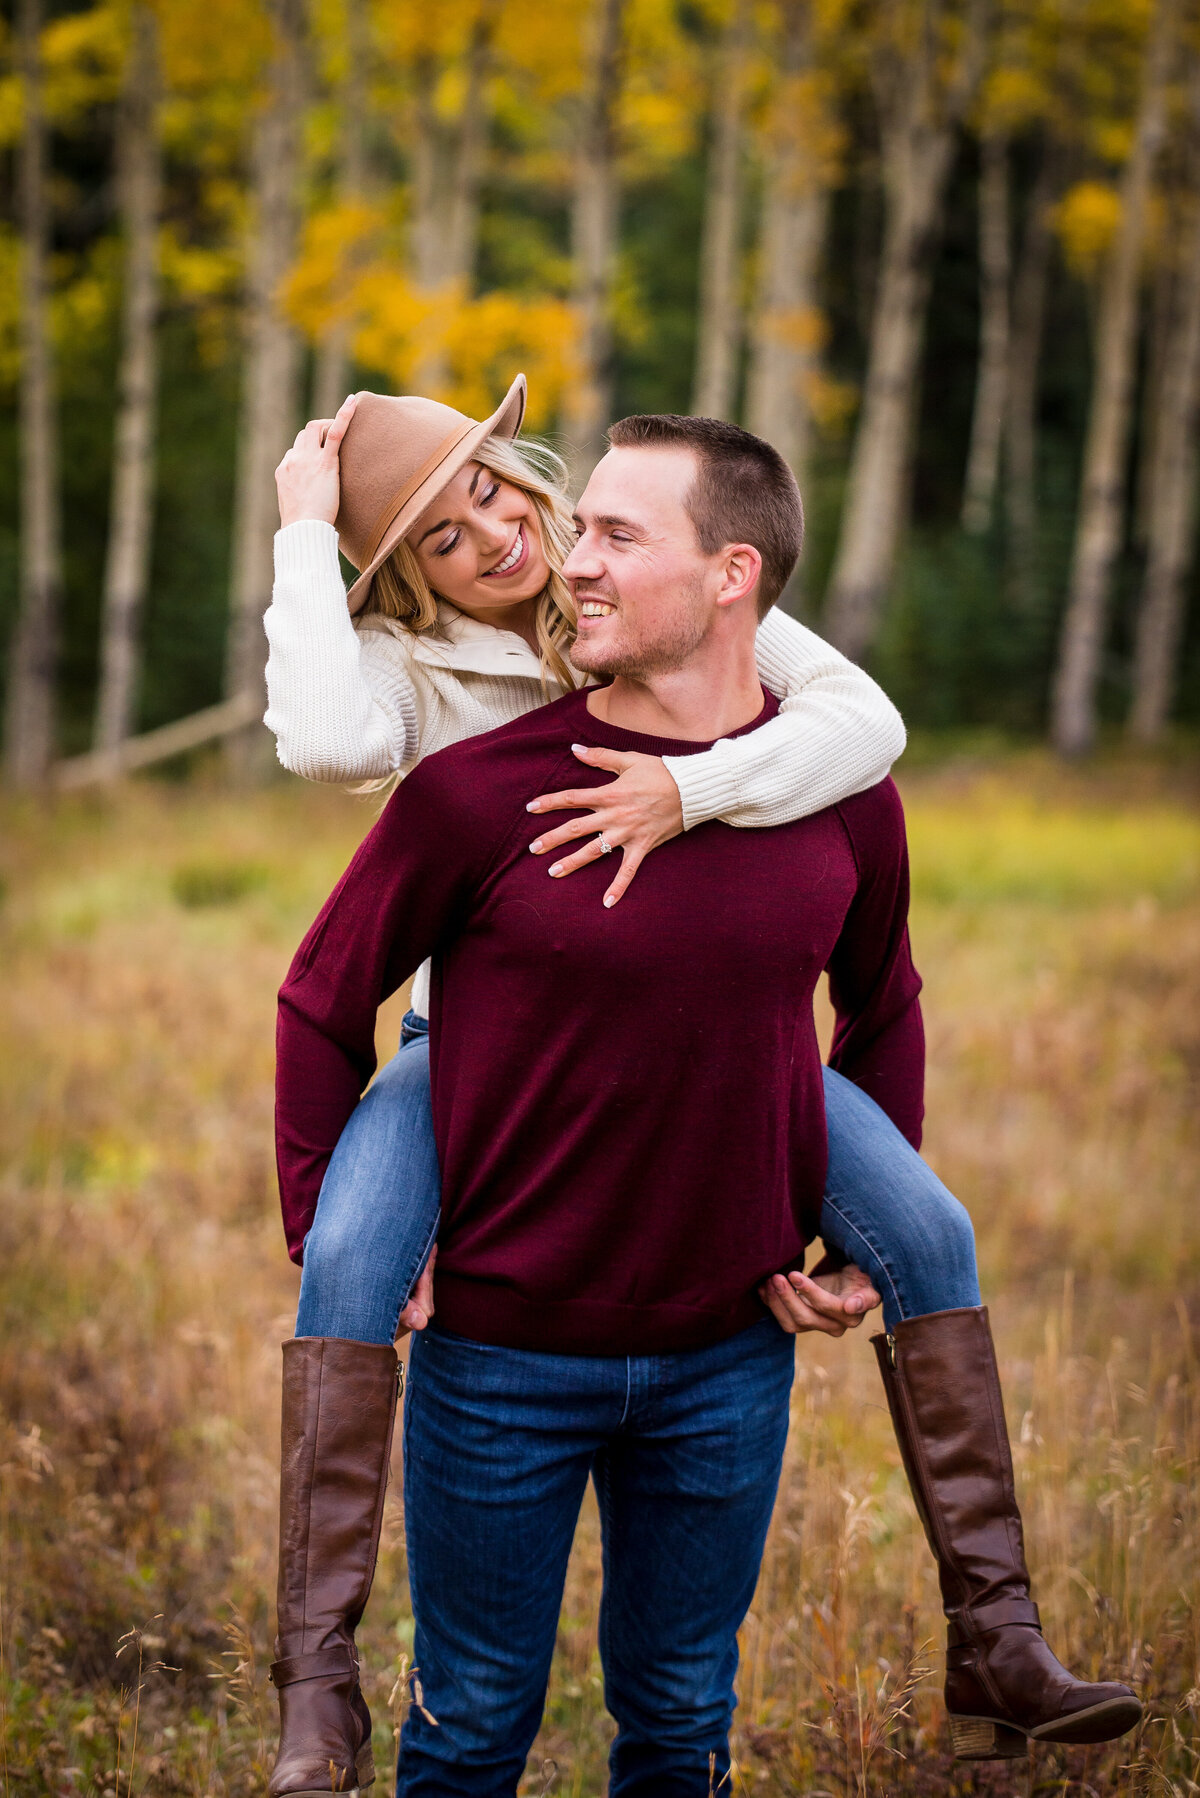 A man gives his fiancée a piggyback ride as she smiles and holds onto her hat in a fall setting.